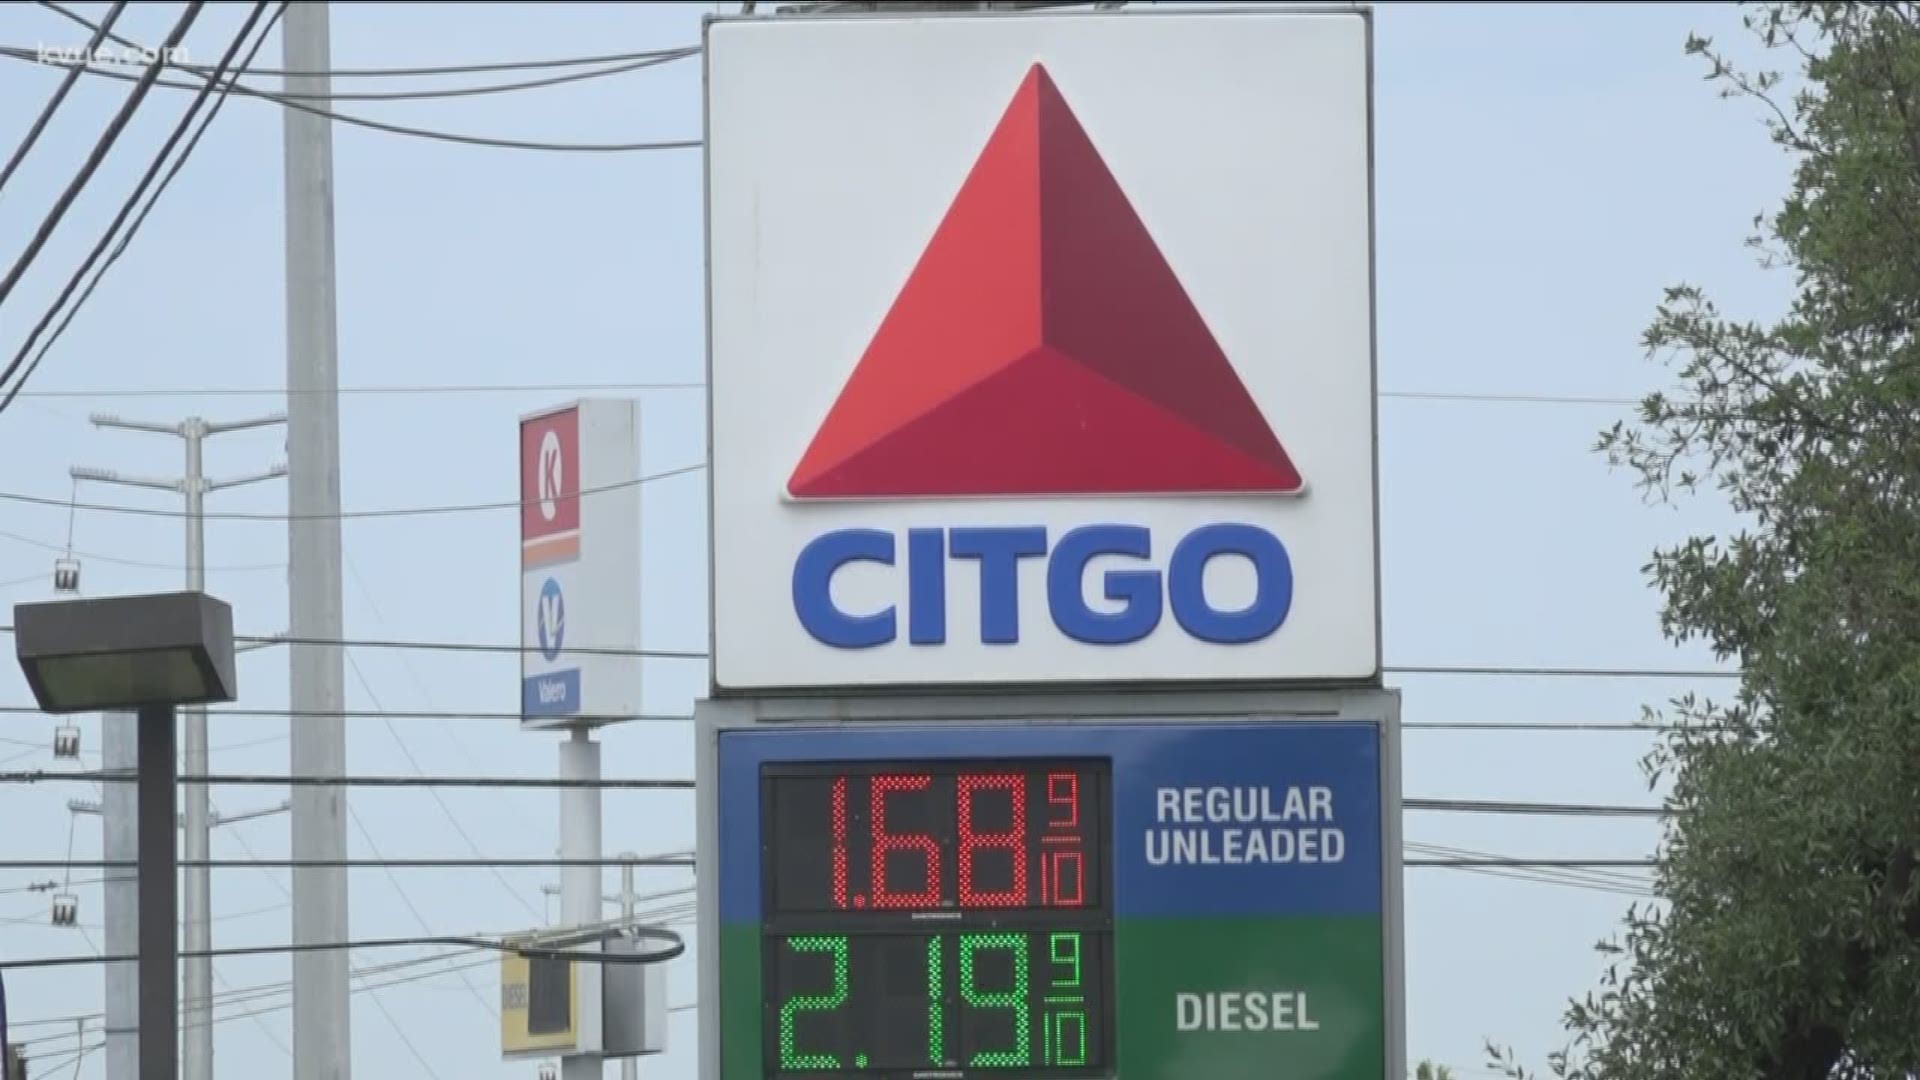 According to AAA,  average gas prices have dropped to their lowest level since 2016. The website shows the average gas price in Texas is $1.75.